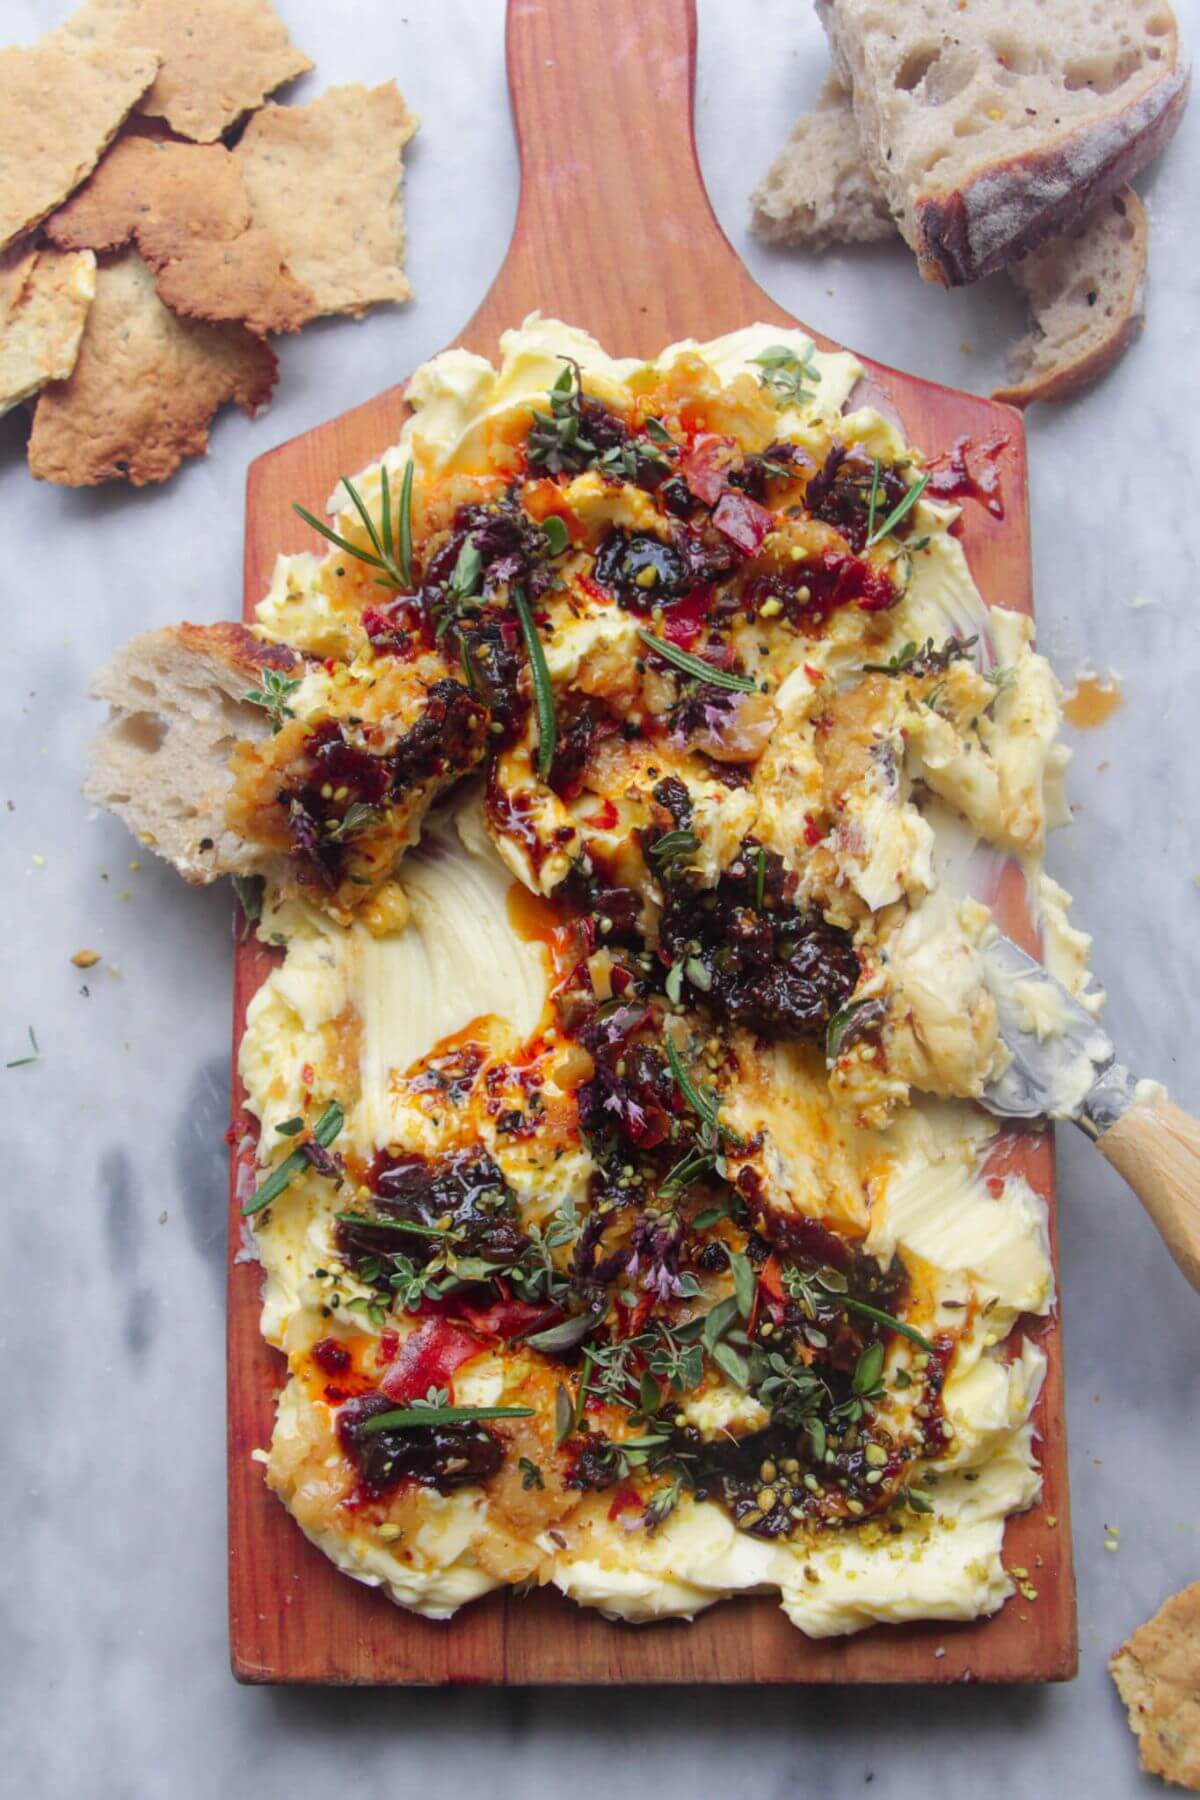 Butter smoothed onto a board and topped with chilli oil, fig chutney and herbs with bread on the side.